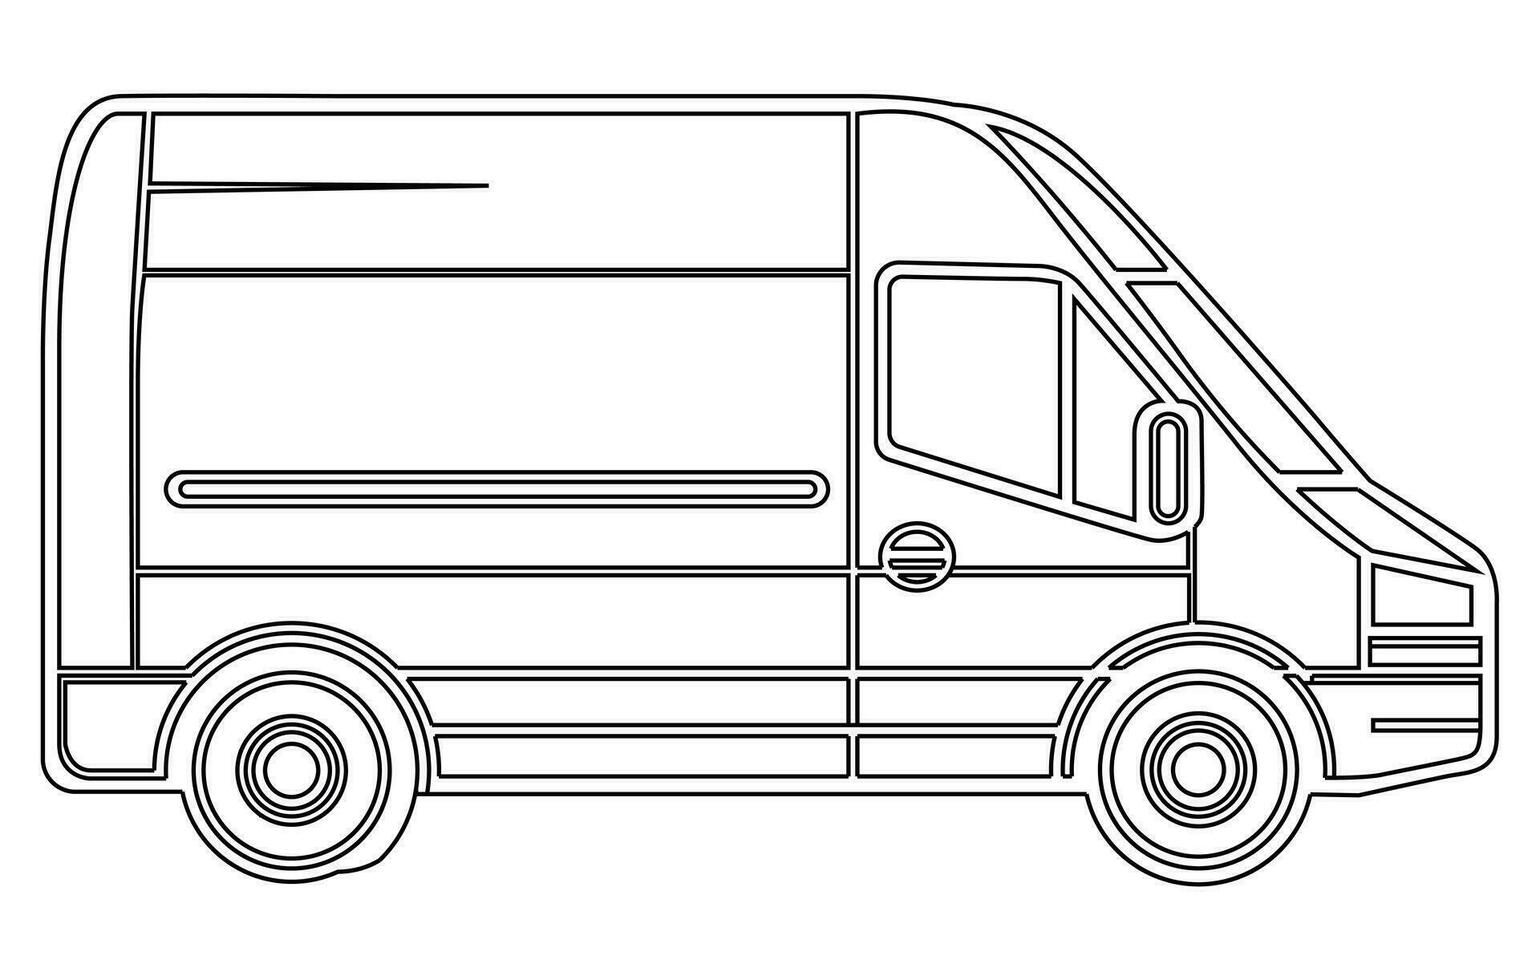 Van isolated outline.Van with side view,Van Vector flat style illustration outline.